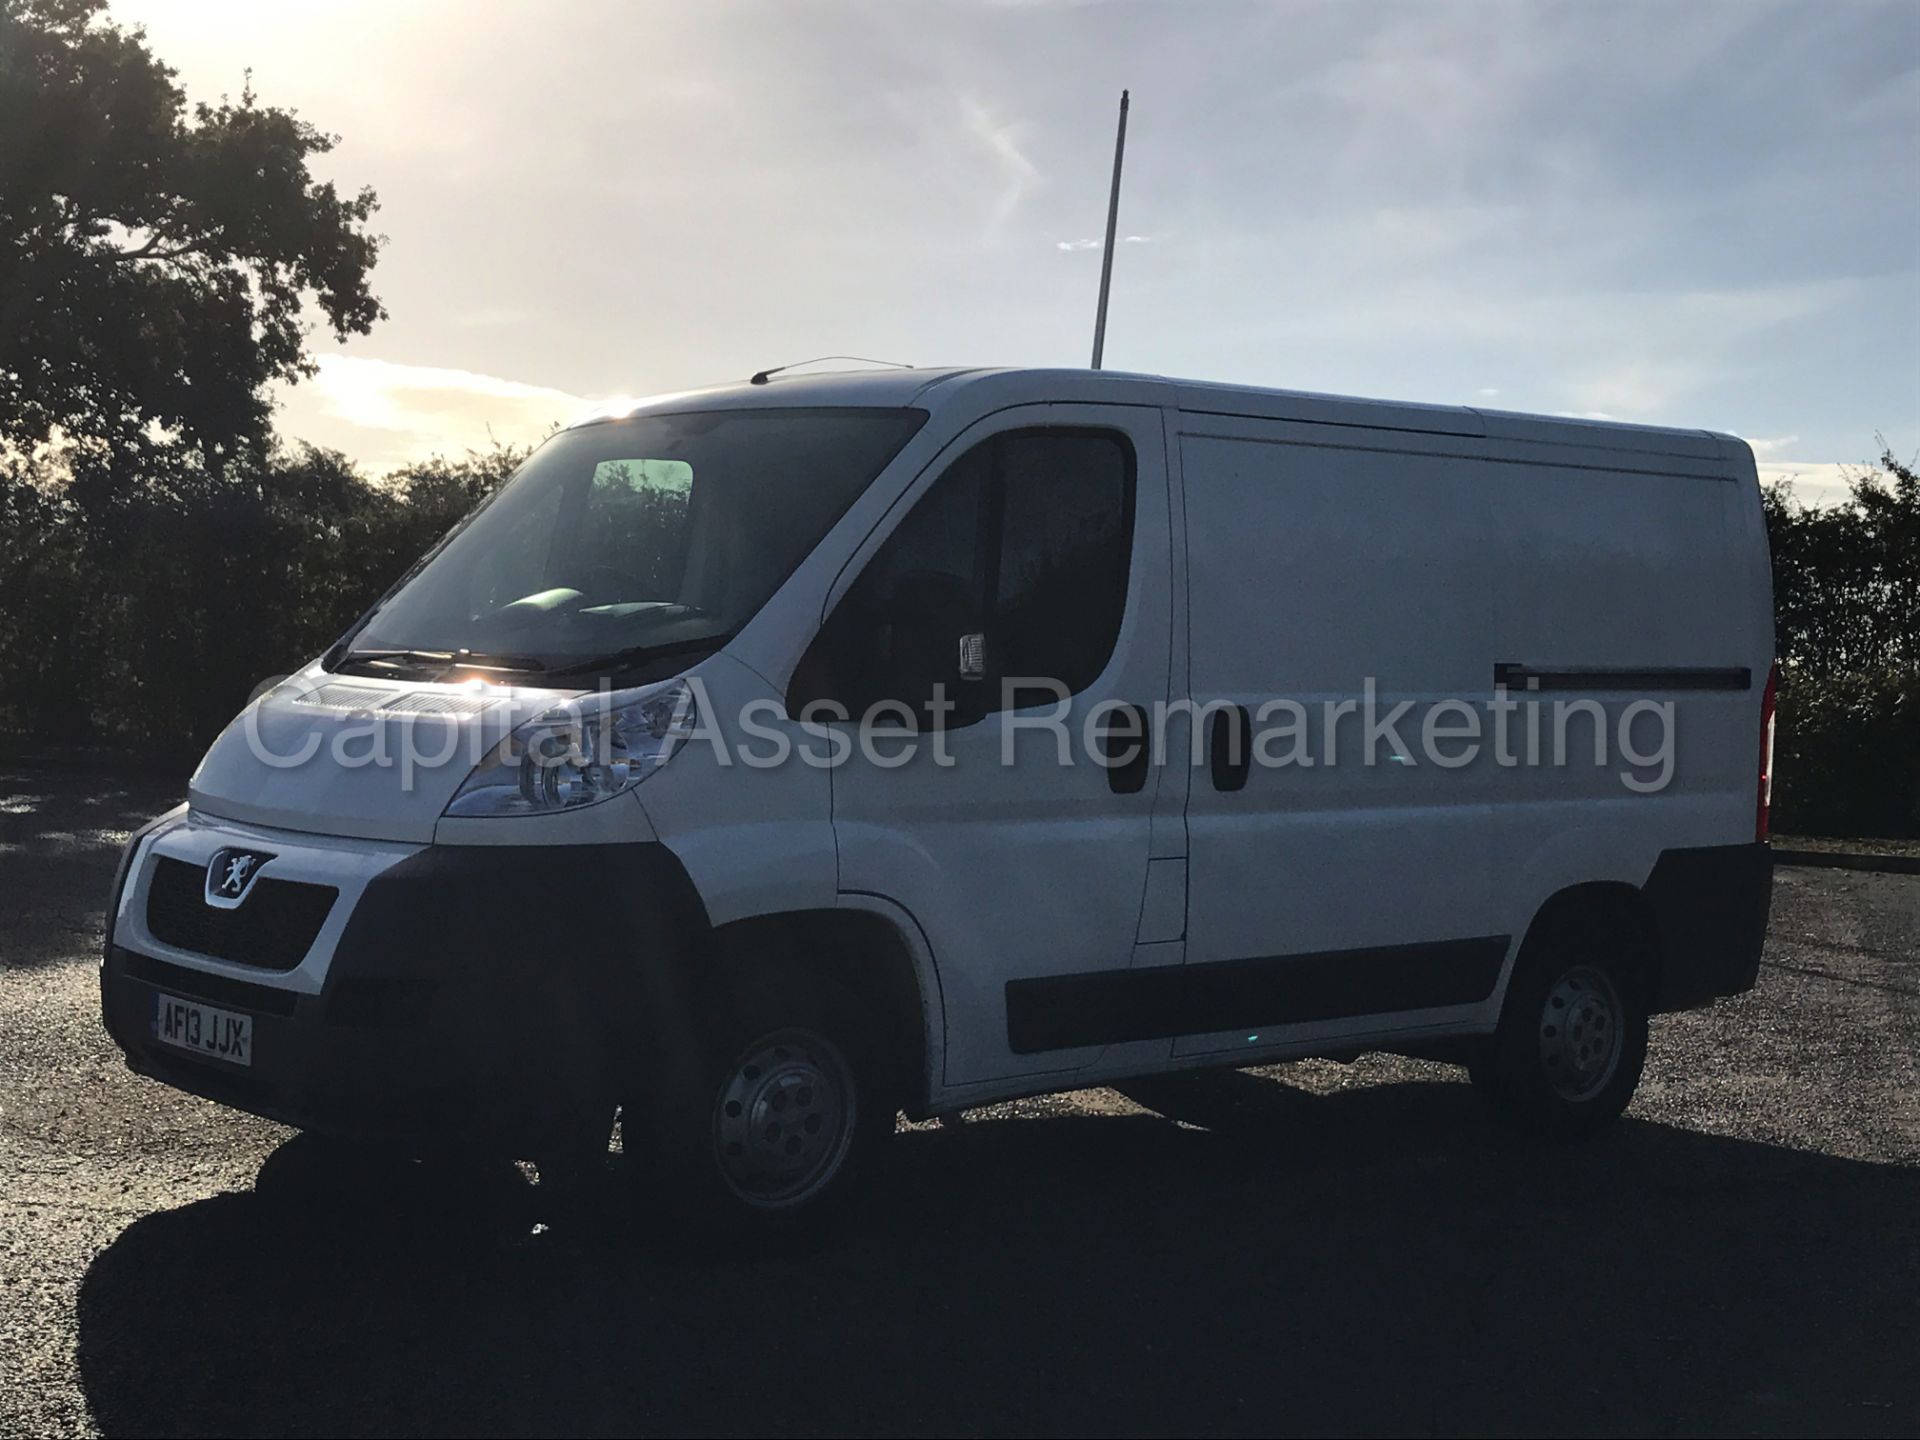 PEUGEOT BOXER 330 L1H1 (2013 - 13 REG) 'SWB - 2.2 HDI - 6 SPEED' (1 OWNER FROM NEW) **LOW MILES** - Image 5 of 19